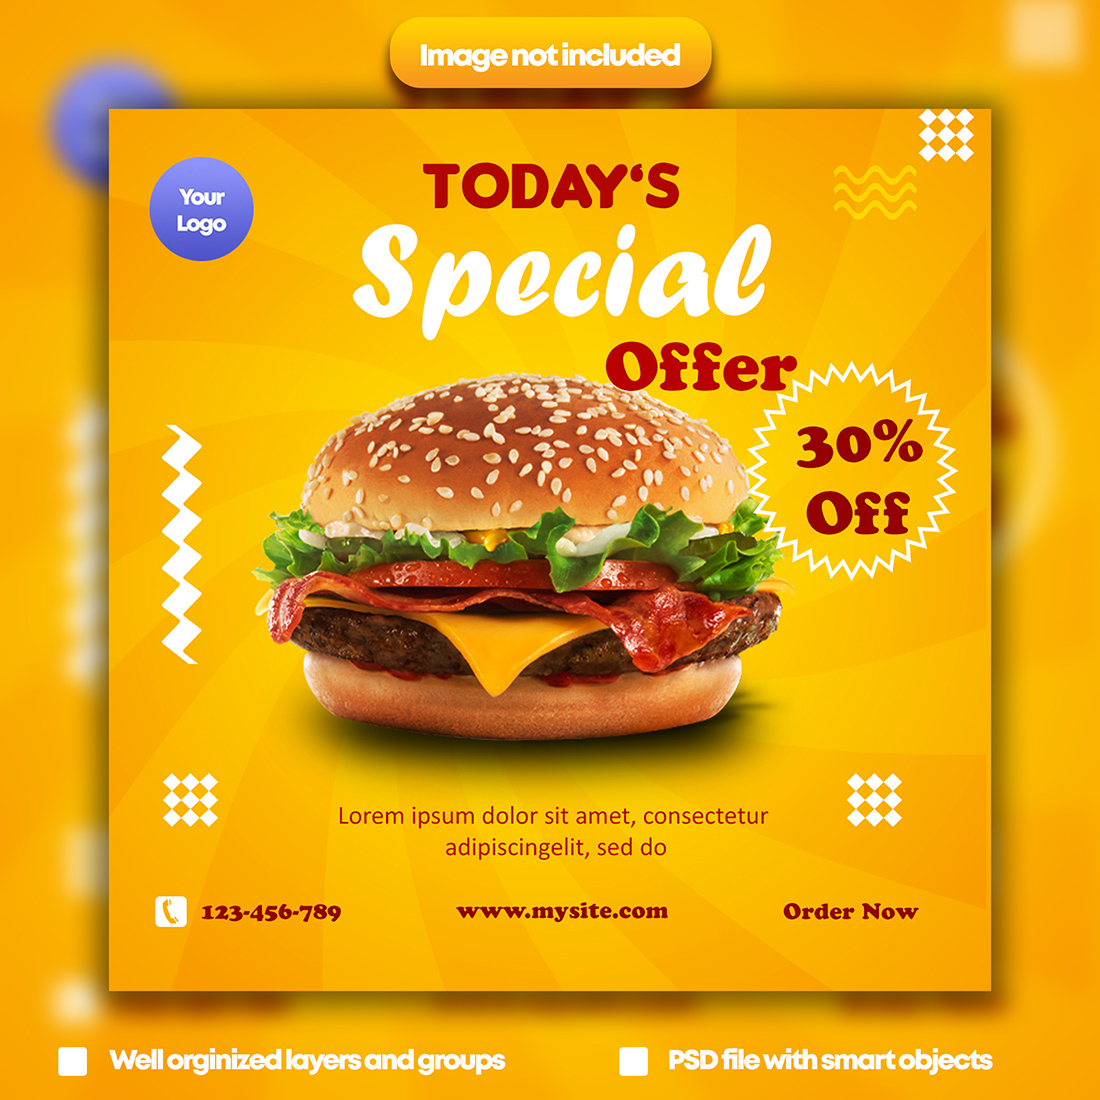 Instagram meal/ burger promotion PSD template cover image.